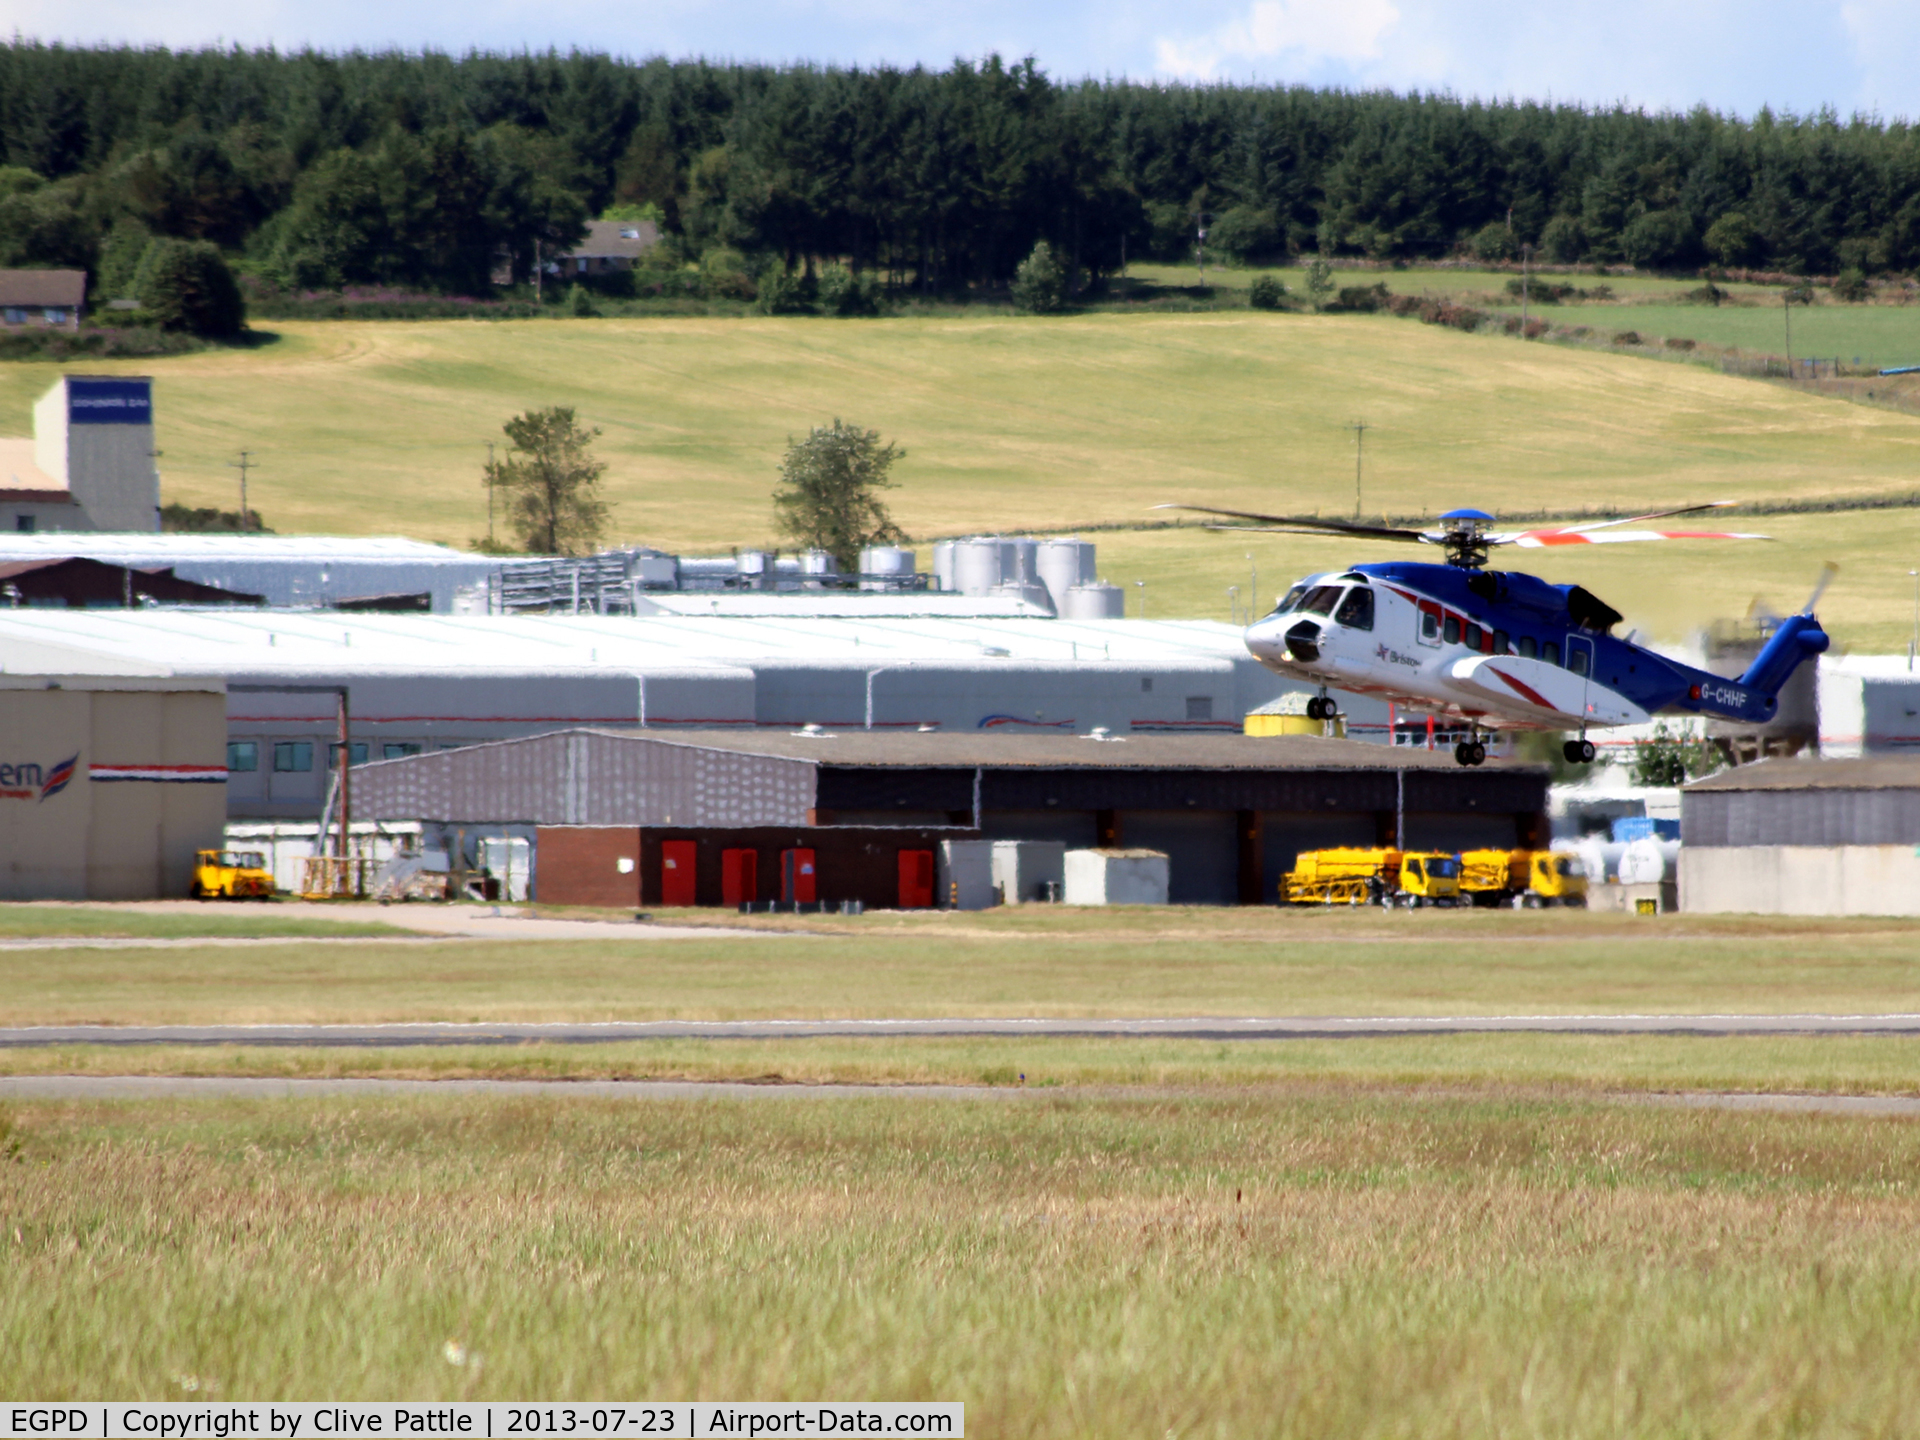 Aberdeen Airport, Aberdeen, Scotland United Kingdom (EGPD) - Sikorsky S-92 G-CHHF of Bristows Helicopters lands at EGPD